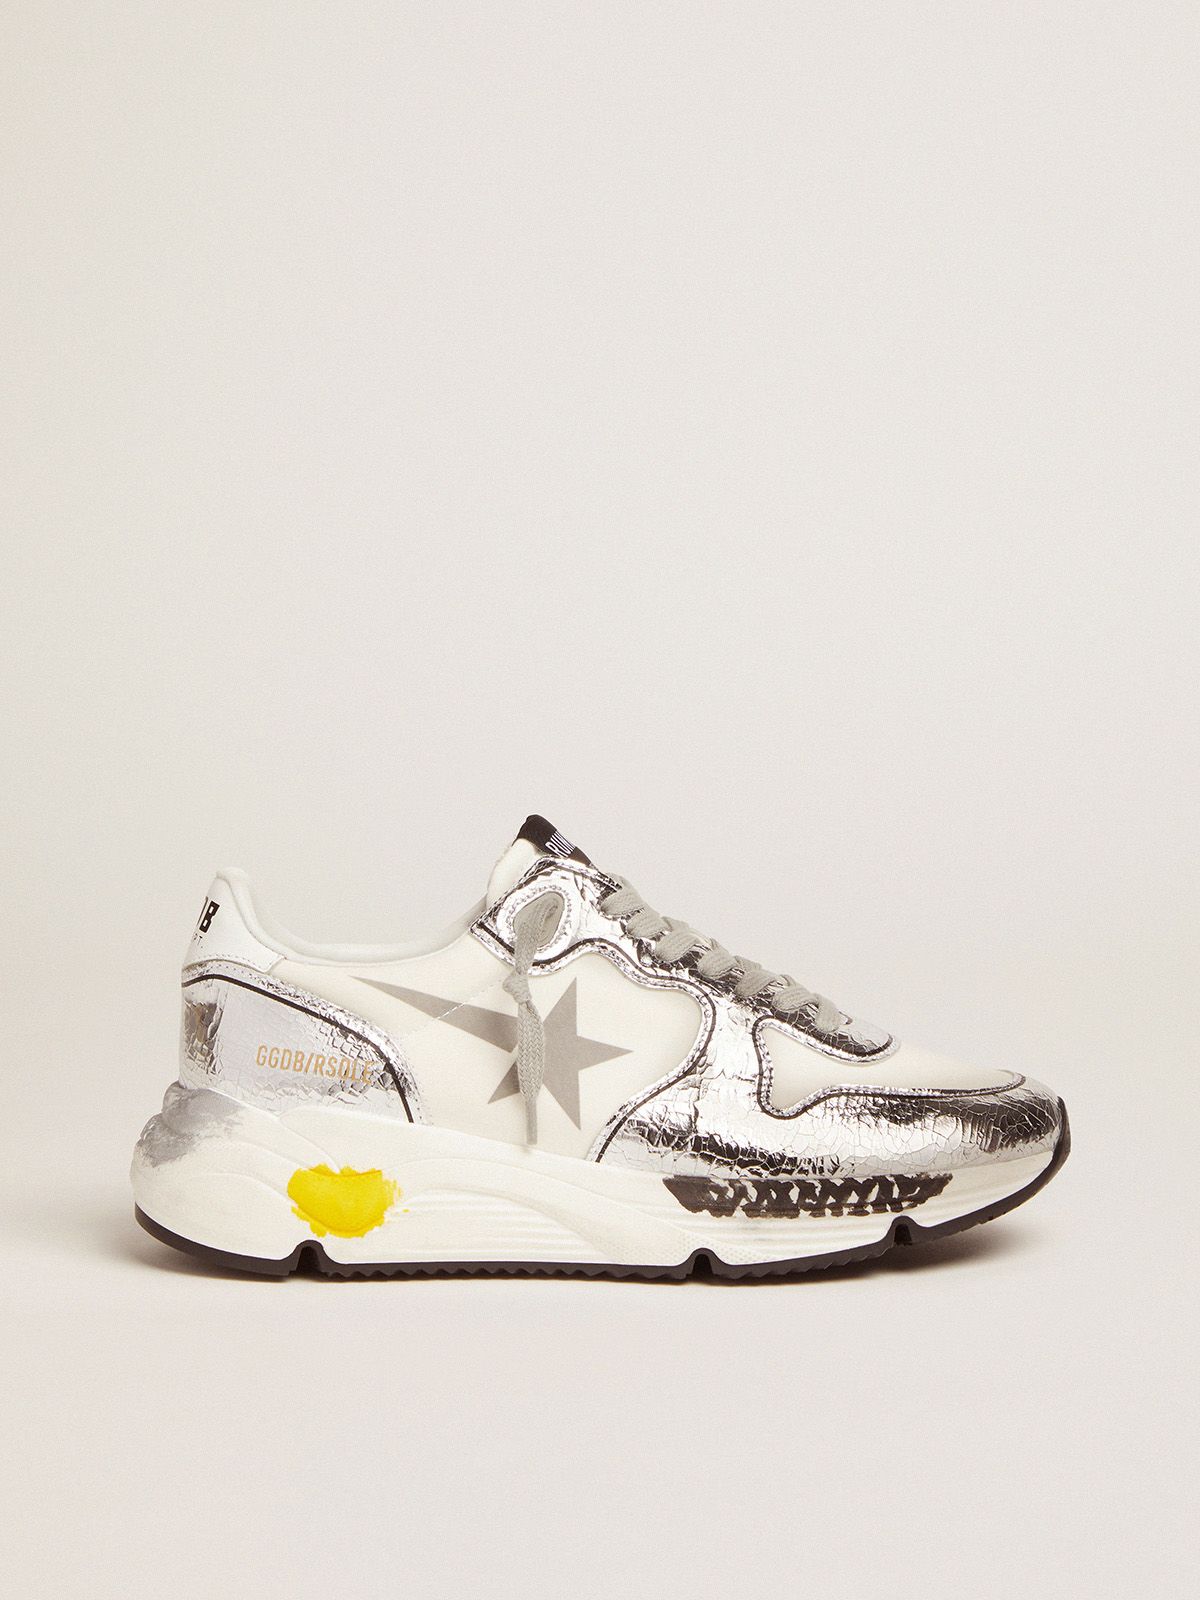 golden goose white sneakers Silver and Running Sole